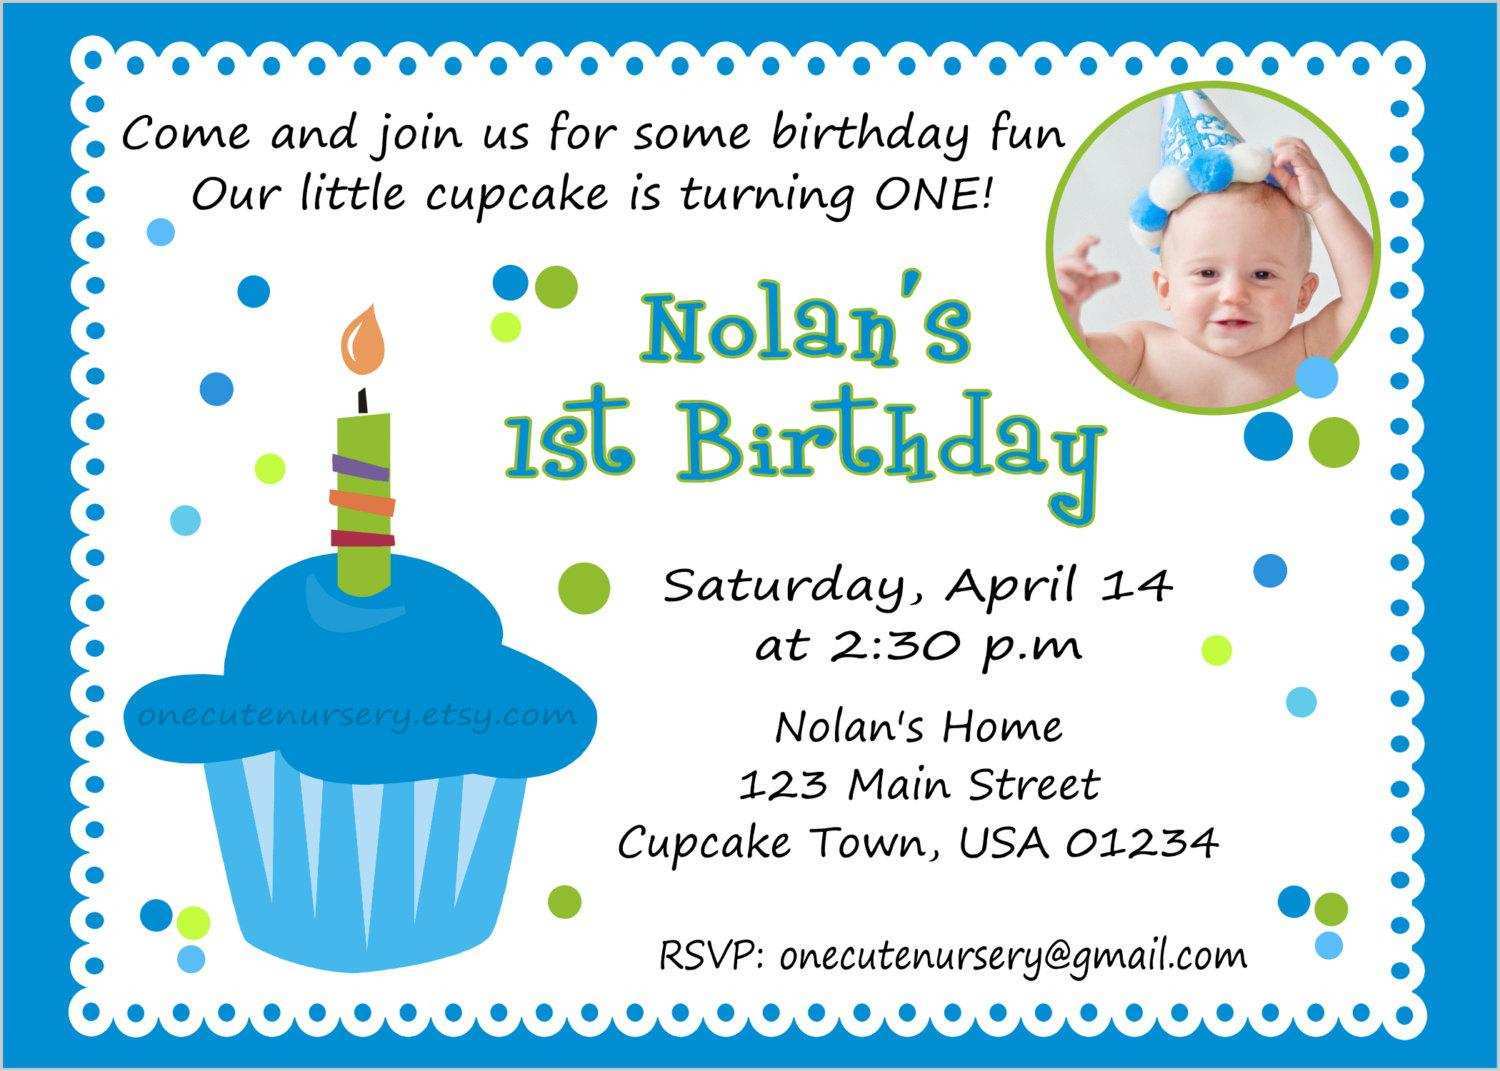 75 Visiting Example Of Invitation Card For Birthday Maker for Example Of Invitation Card For Birthday